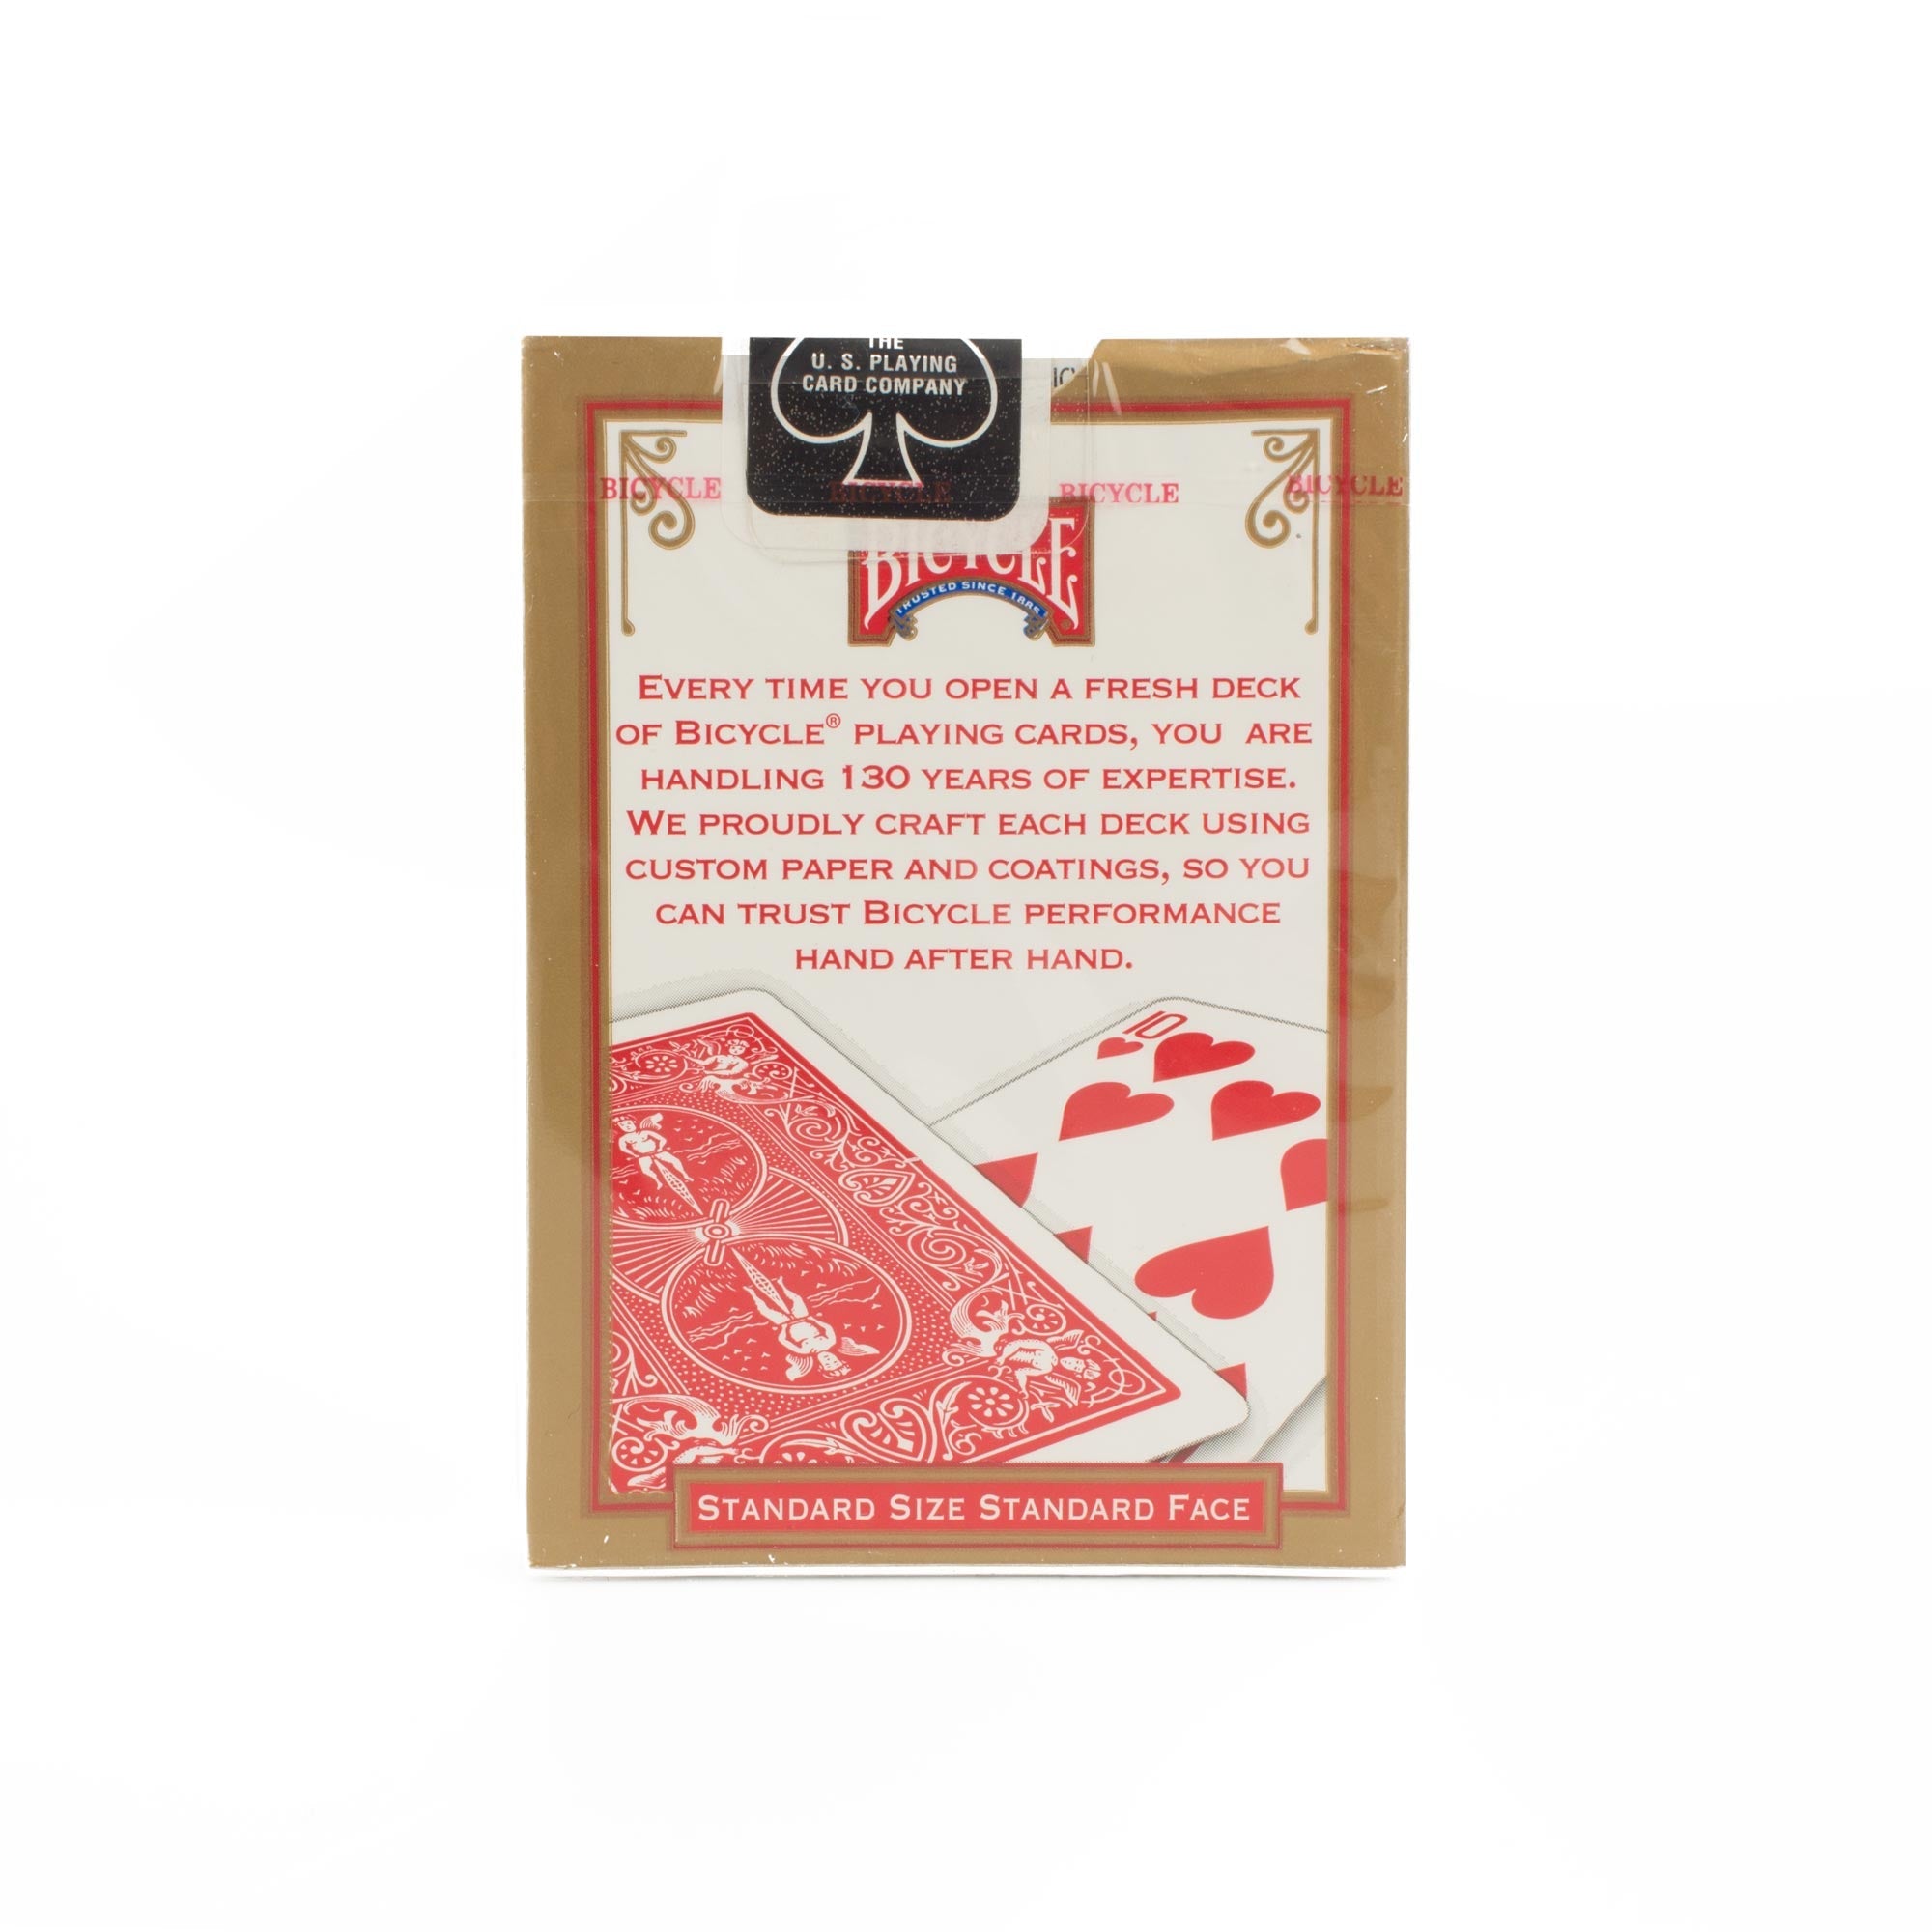 Bicycle Standard Deck red back of packet